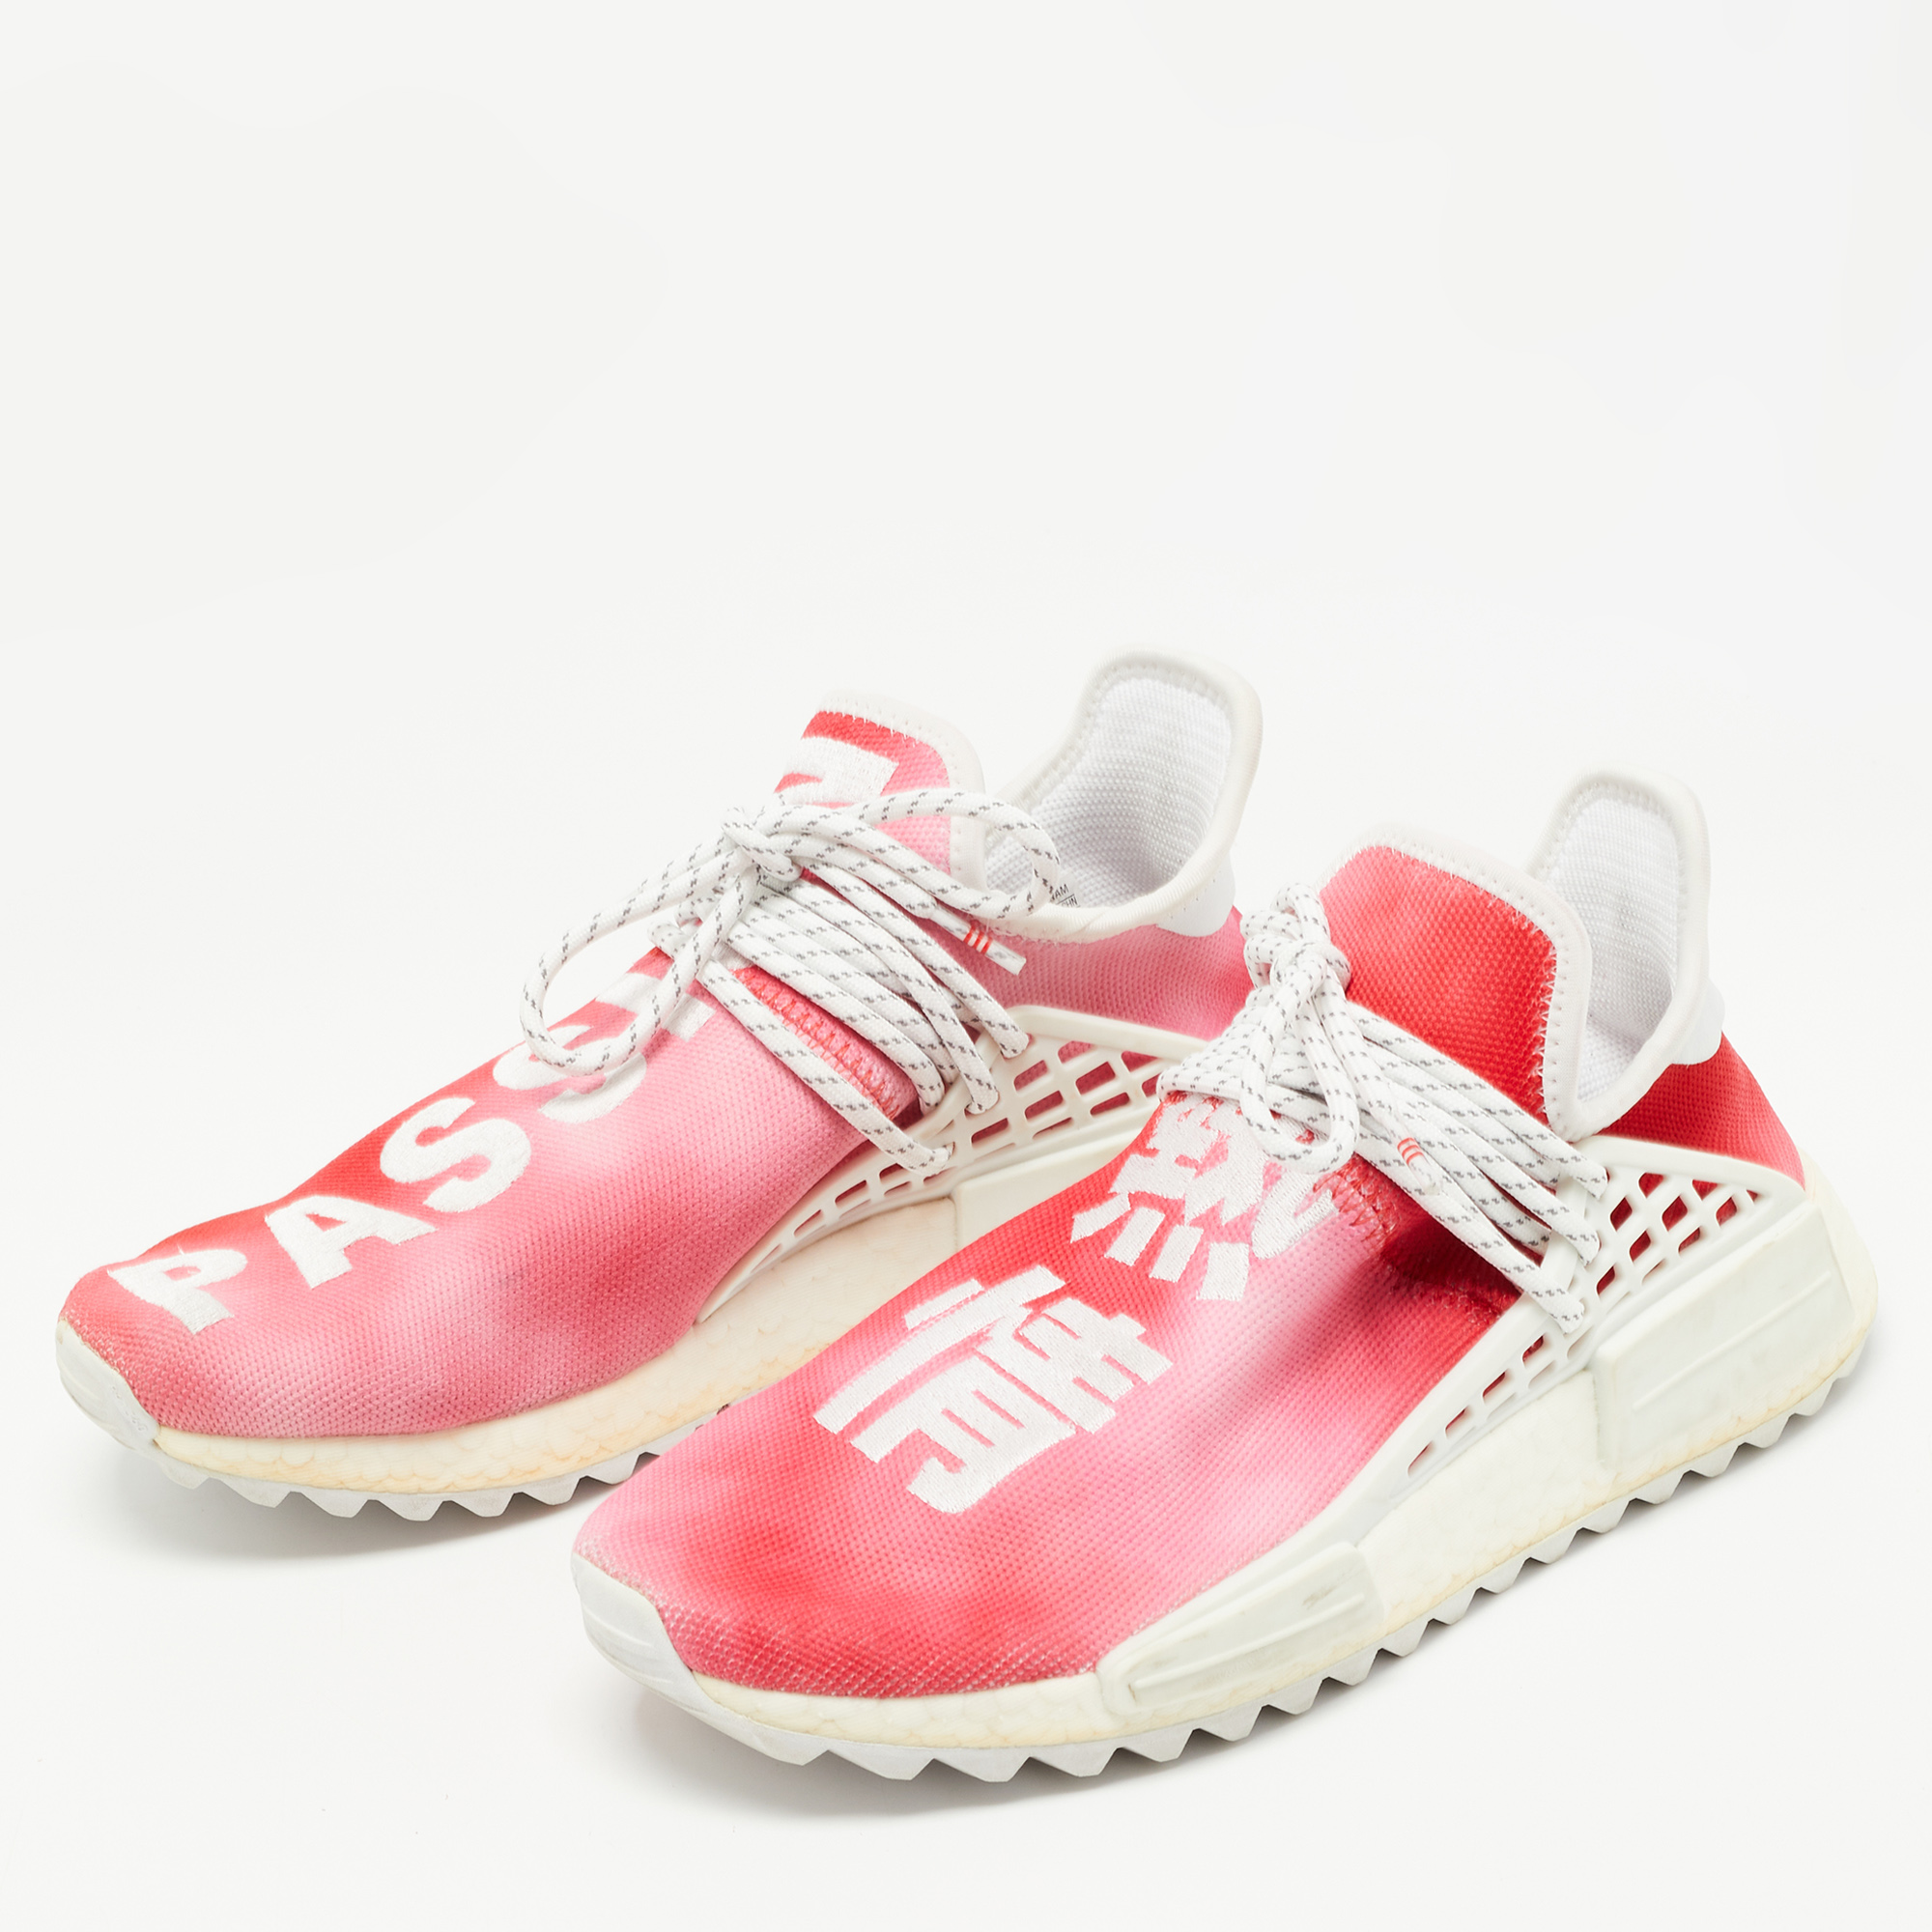 

Pharrell Williams x Adidas Red Knit Fabric NMD HU China Pack Passion Sneakers Size, Pink